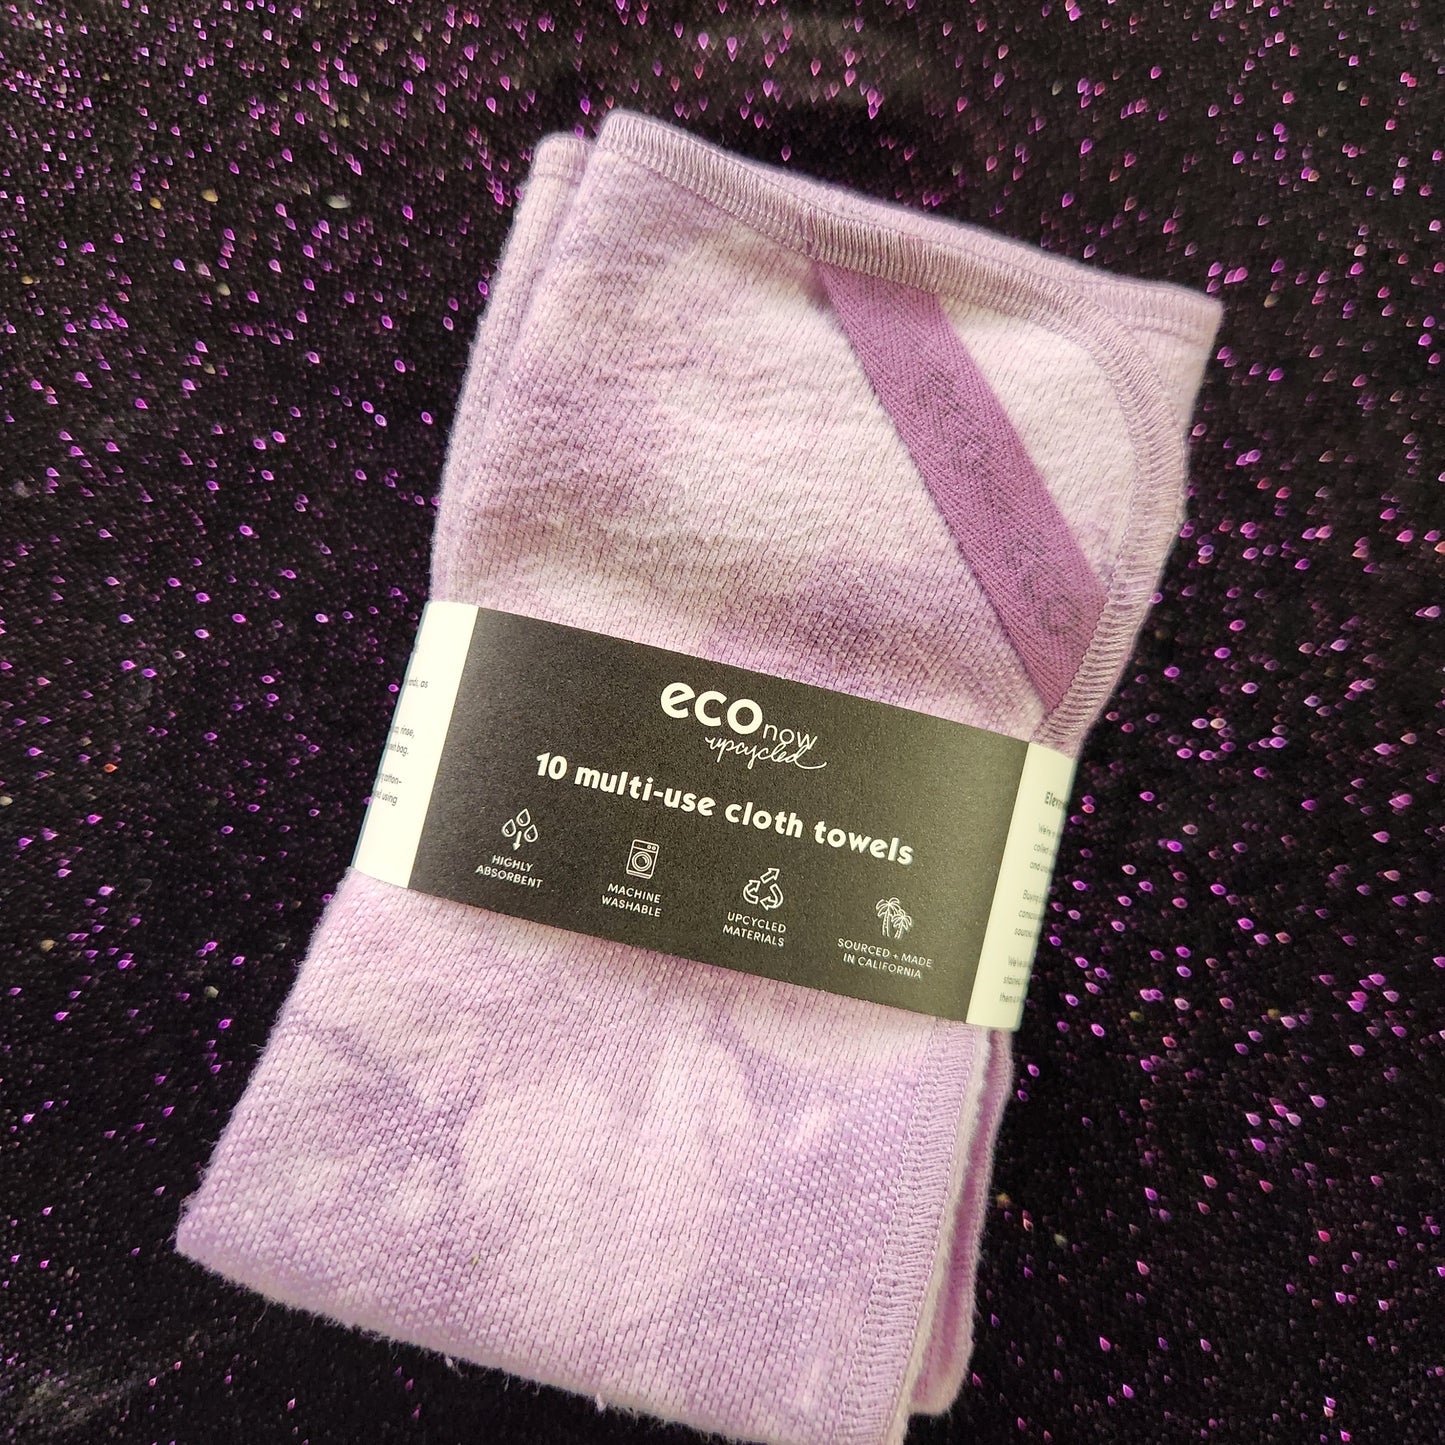 Reusable Cloth Products by Eco Now 🌏